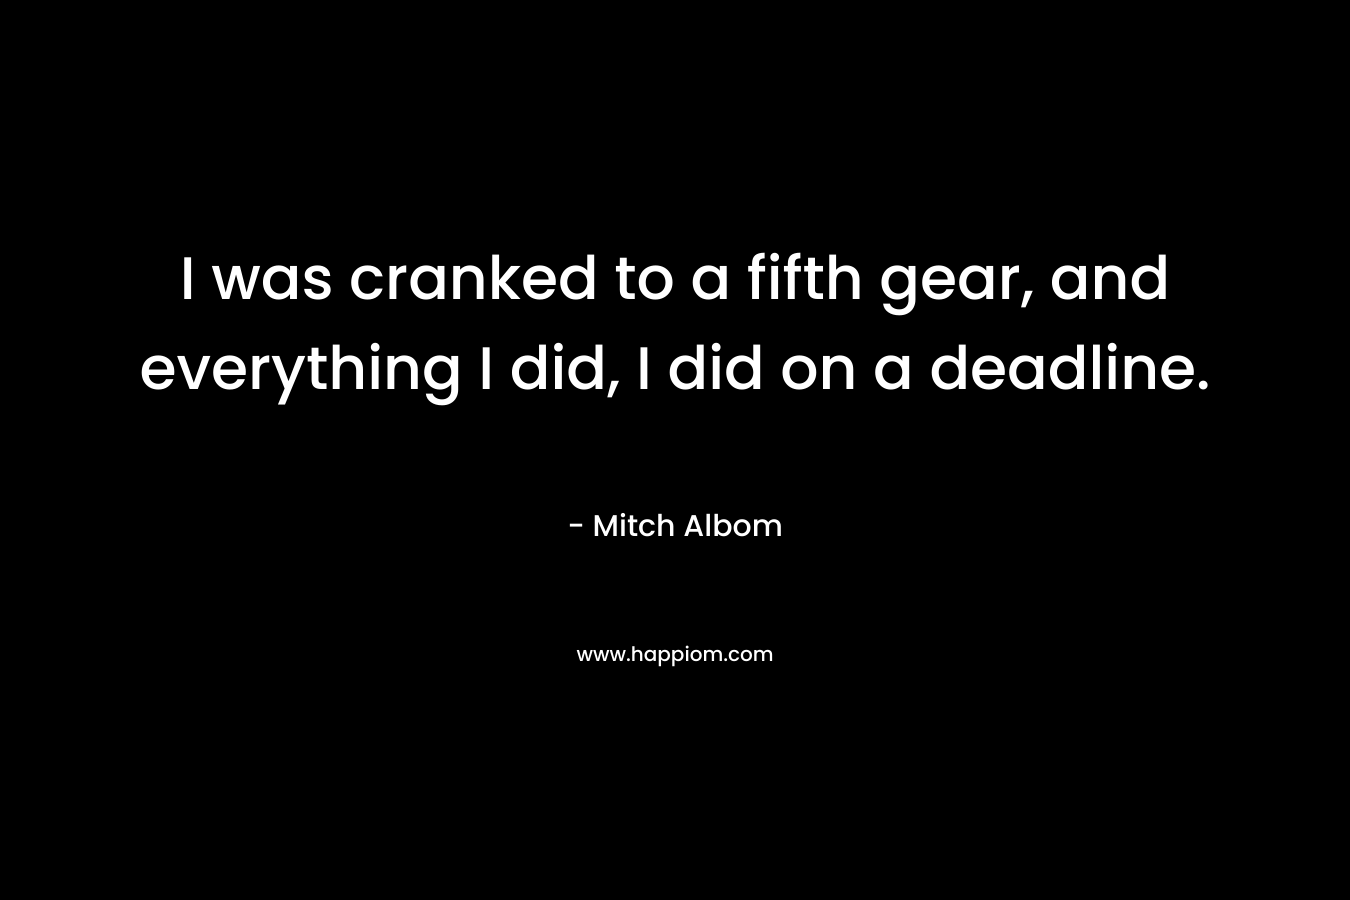 I was cranked to a fifth gear, and everything I did, I did on a deadline. – Mitch Albom